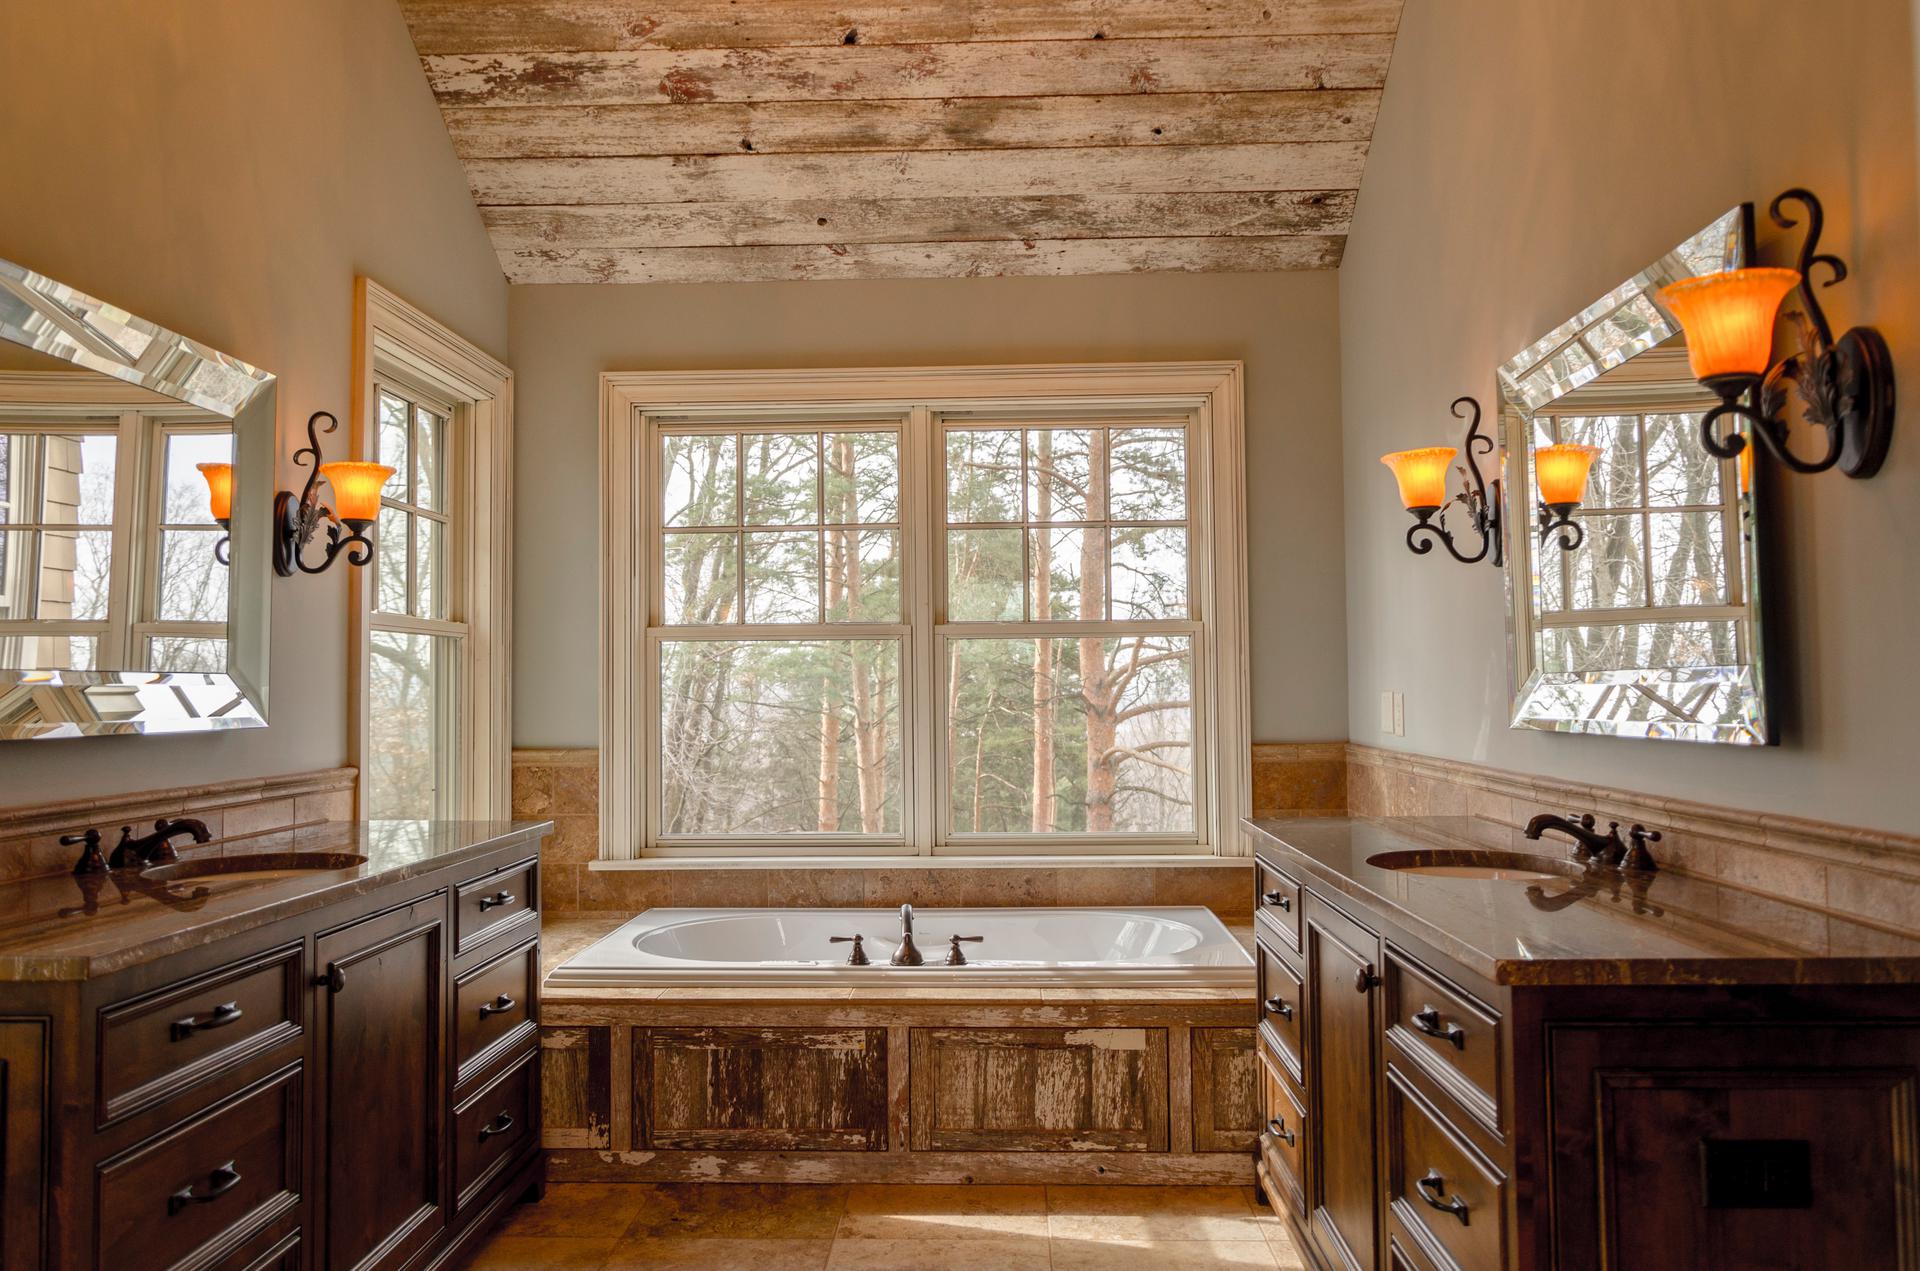 This bathroom features two vanities, a bathtub, warm lighting and three windows that overlook the outdoors.